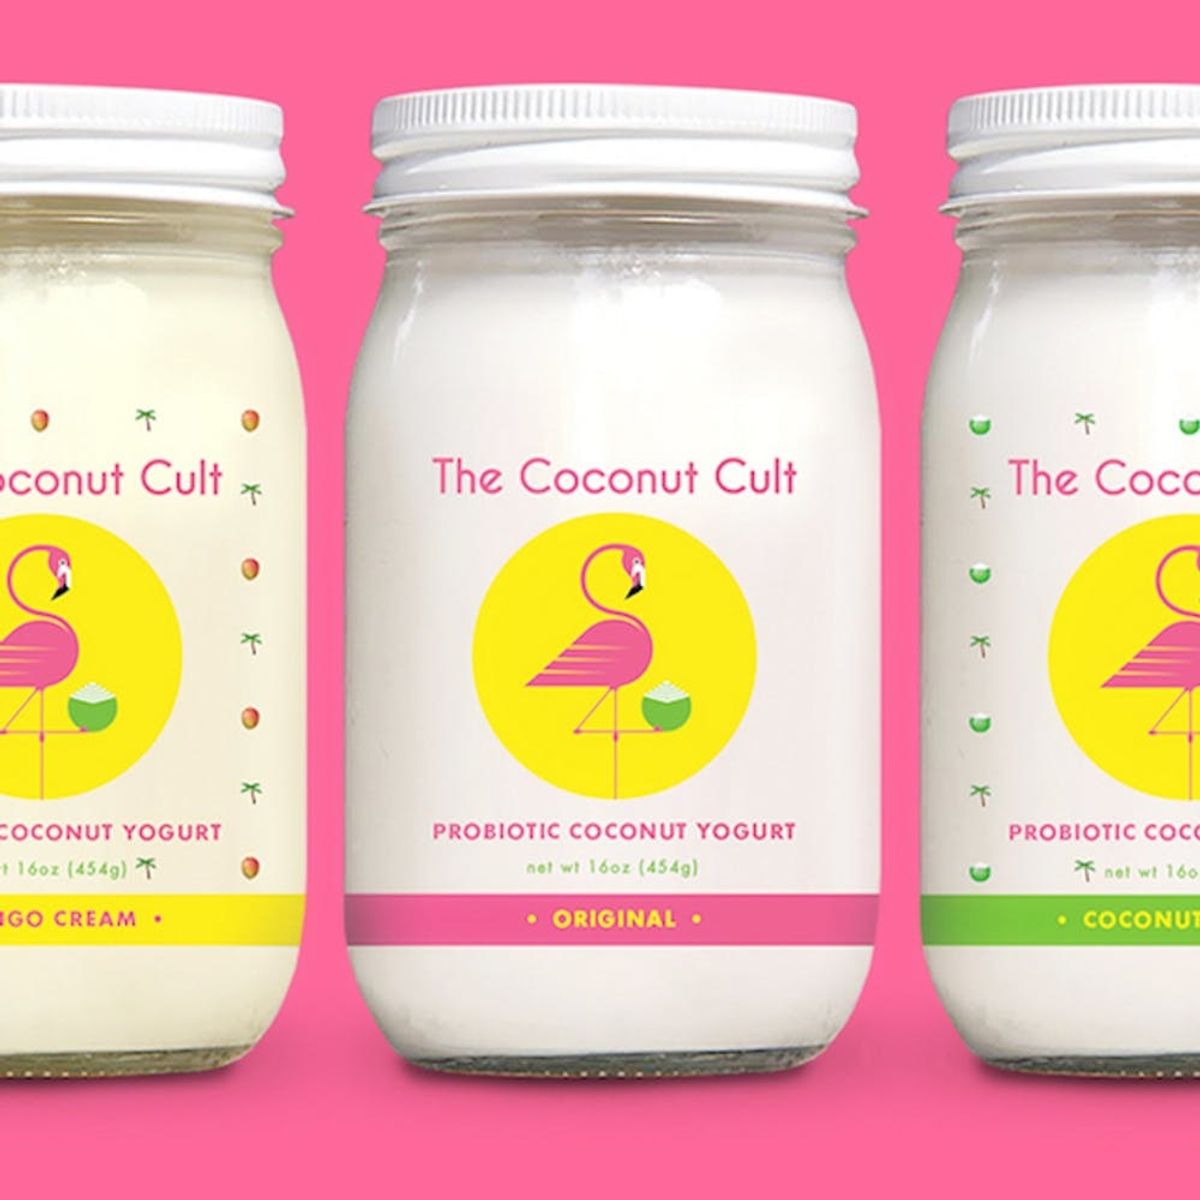 Meet the $25 Coconut Yogurt That’s Taking Over Your Instagram Feed